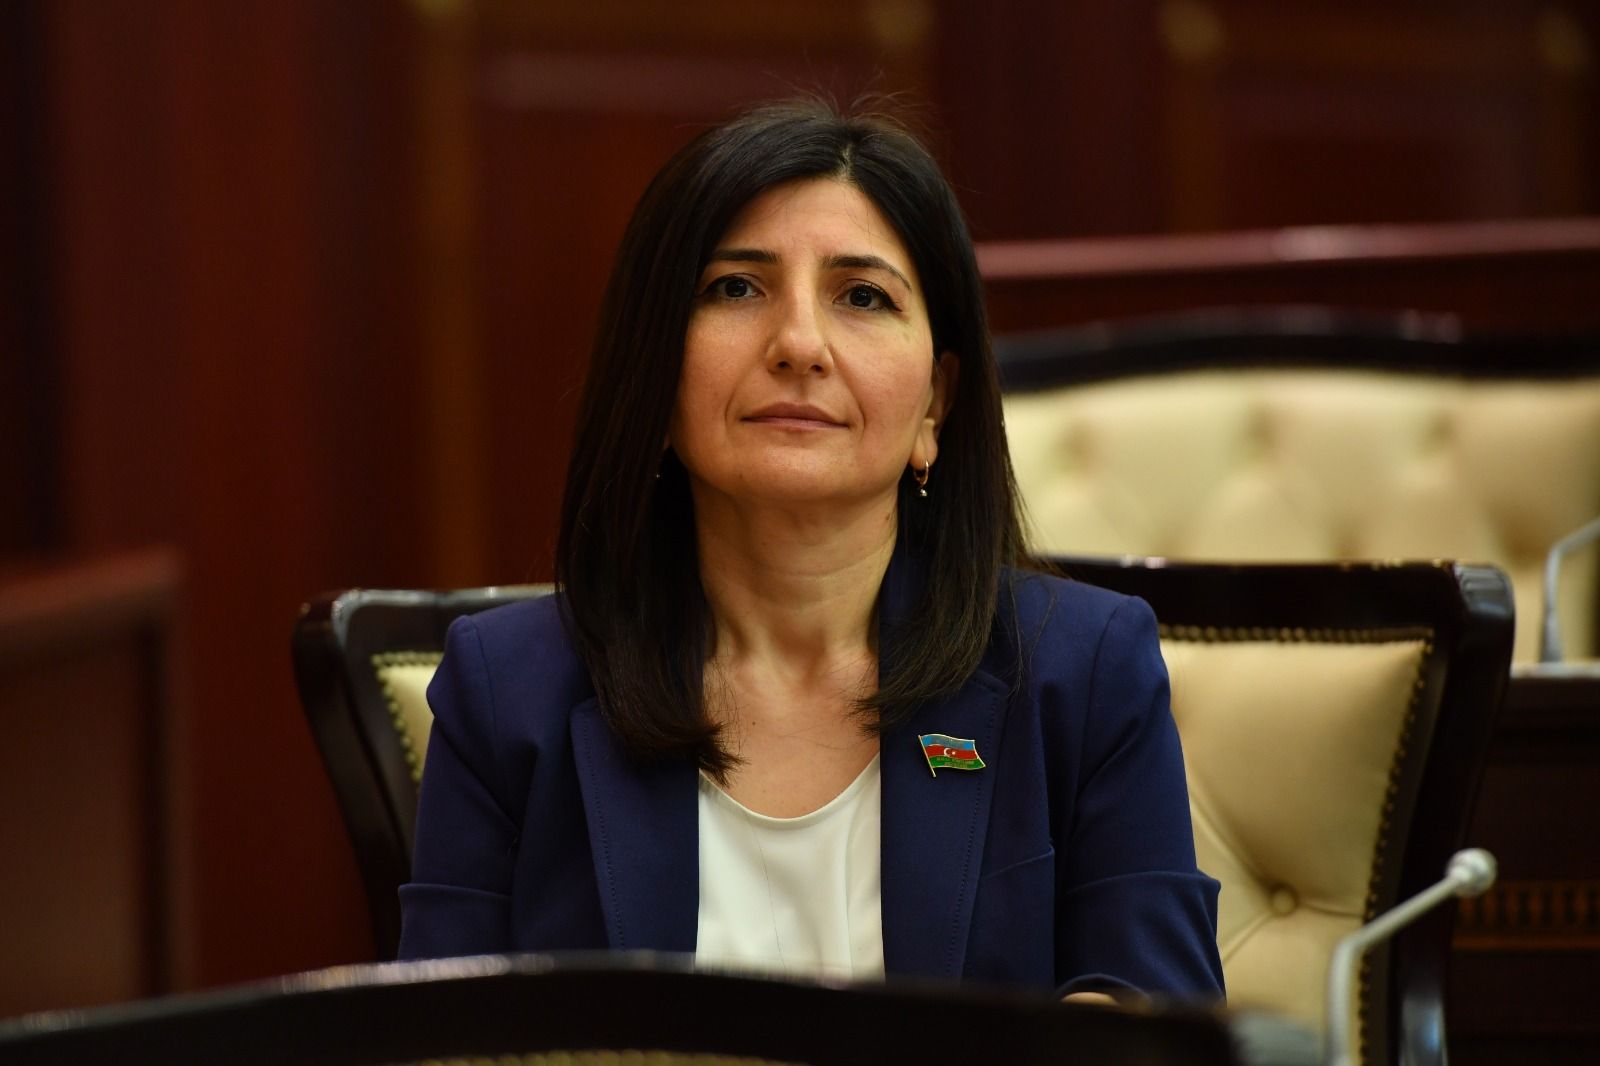 Parliamentarian urges Armenia to face reality & sign peace deal with Azerbaijan